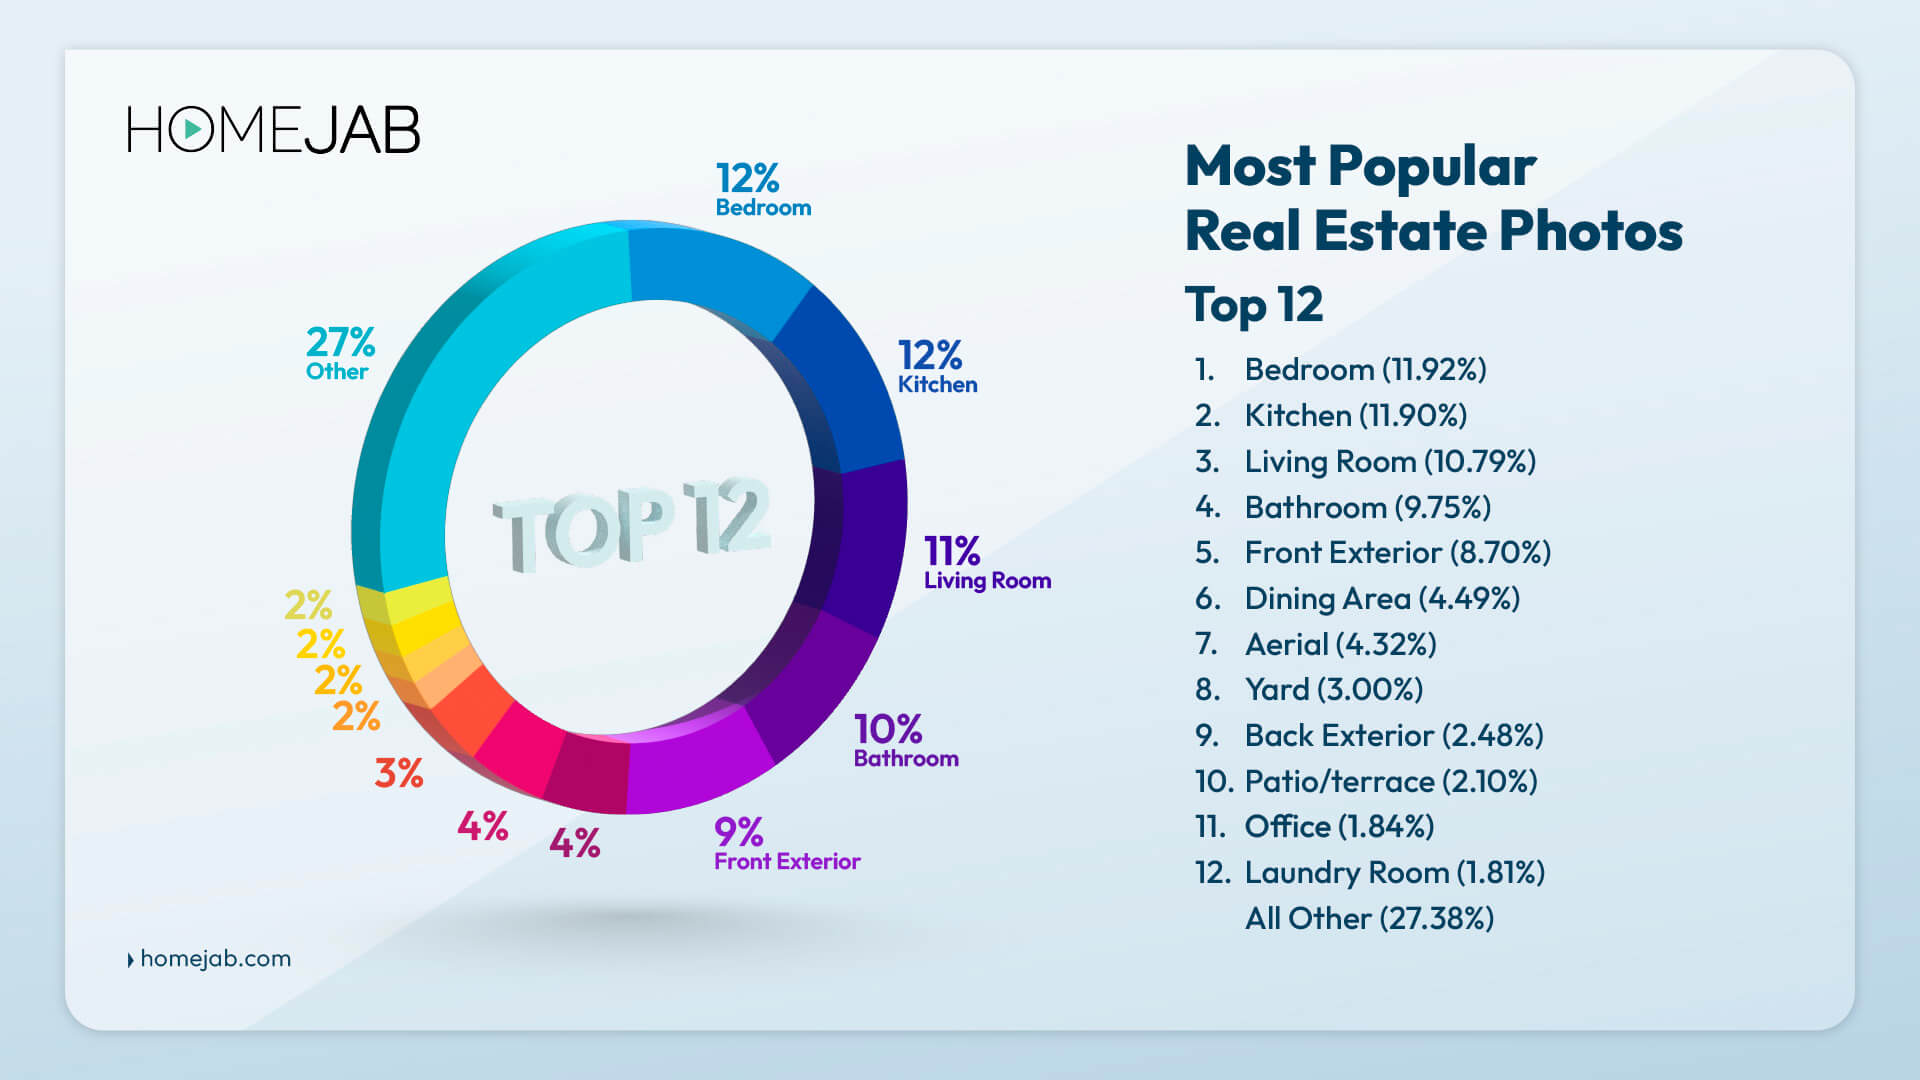 what are the most popular real estate photos?